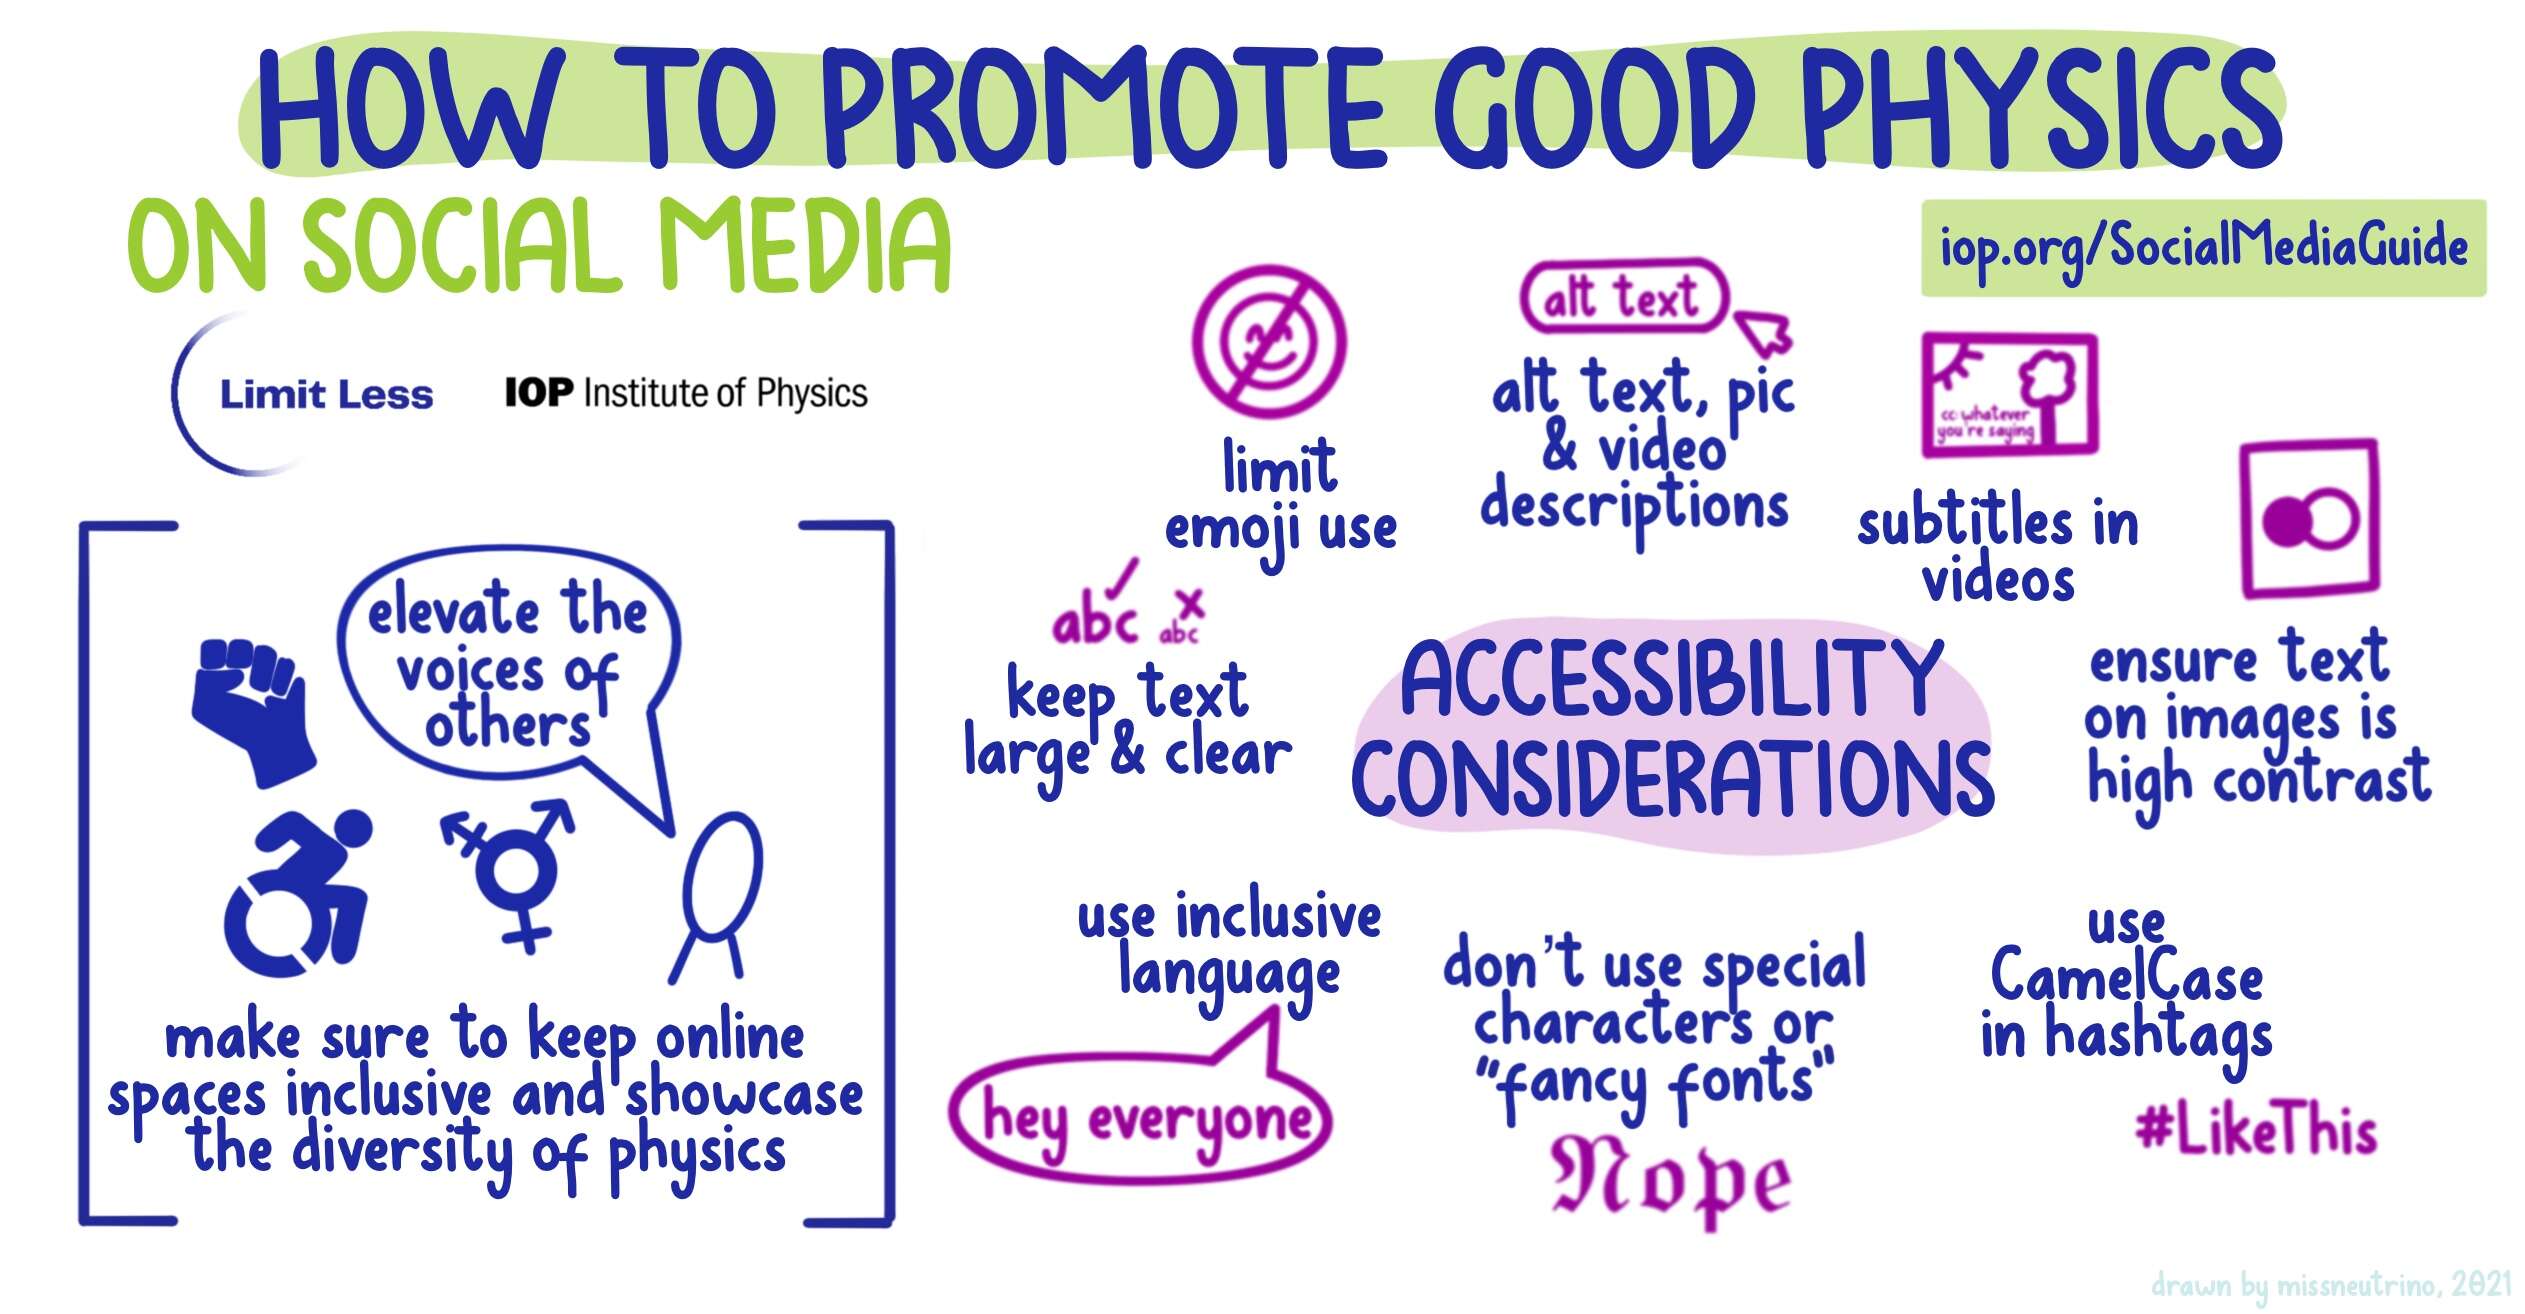 Image text reads: How to promote good physics on social media. Elevate the voices of others: Make sure to keep online spaces inclusive and showcase the diversity of physics. Accessibility considerations: Use alt text, pic and video descriptions. Don’t use special characters or ‘fancy fonts’. Ensure text on images is high contrast. Keep text large and clear. Limit emoji use. Use subtitles in video. Use CamelCase in hashtags, for example #LikeThis. Use inclusive language, for example “hey everyone”